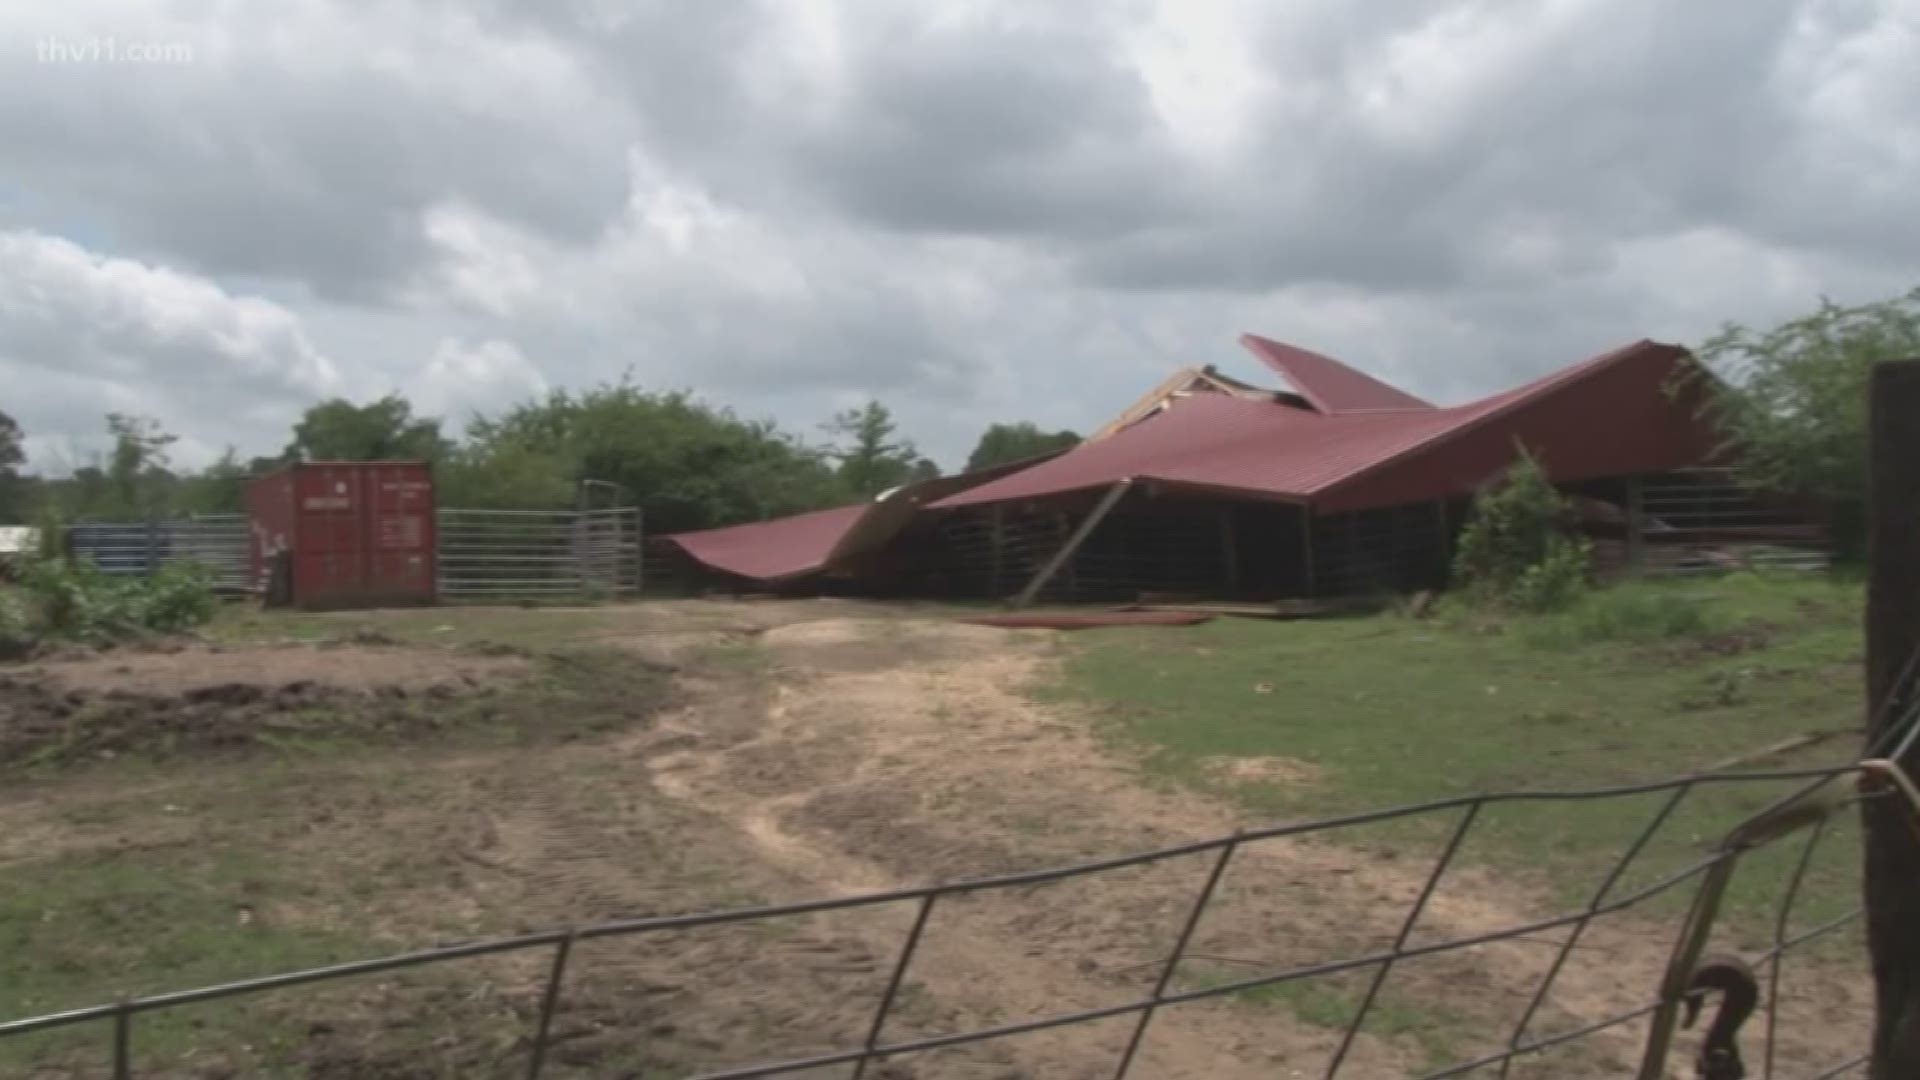 Homeowners and business owners in south Arkansas are hard at work, trying to clean up what Wednesday's storms left behind.